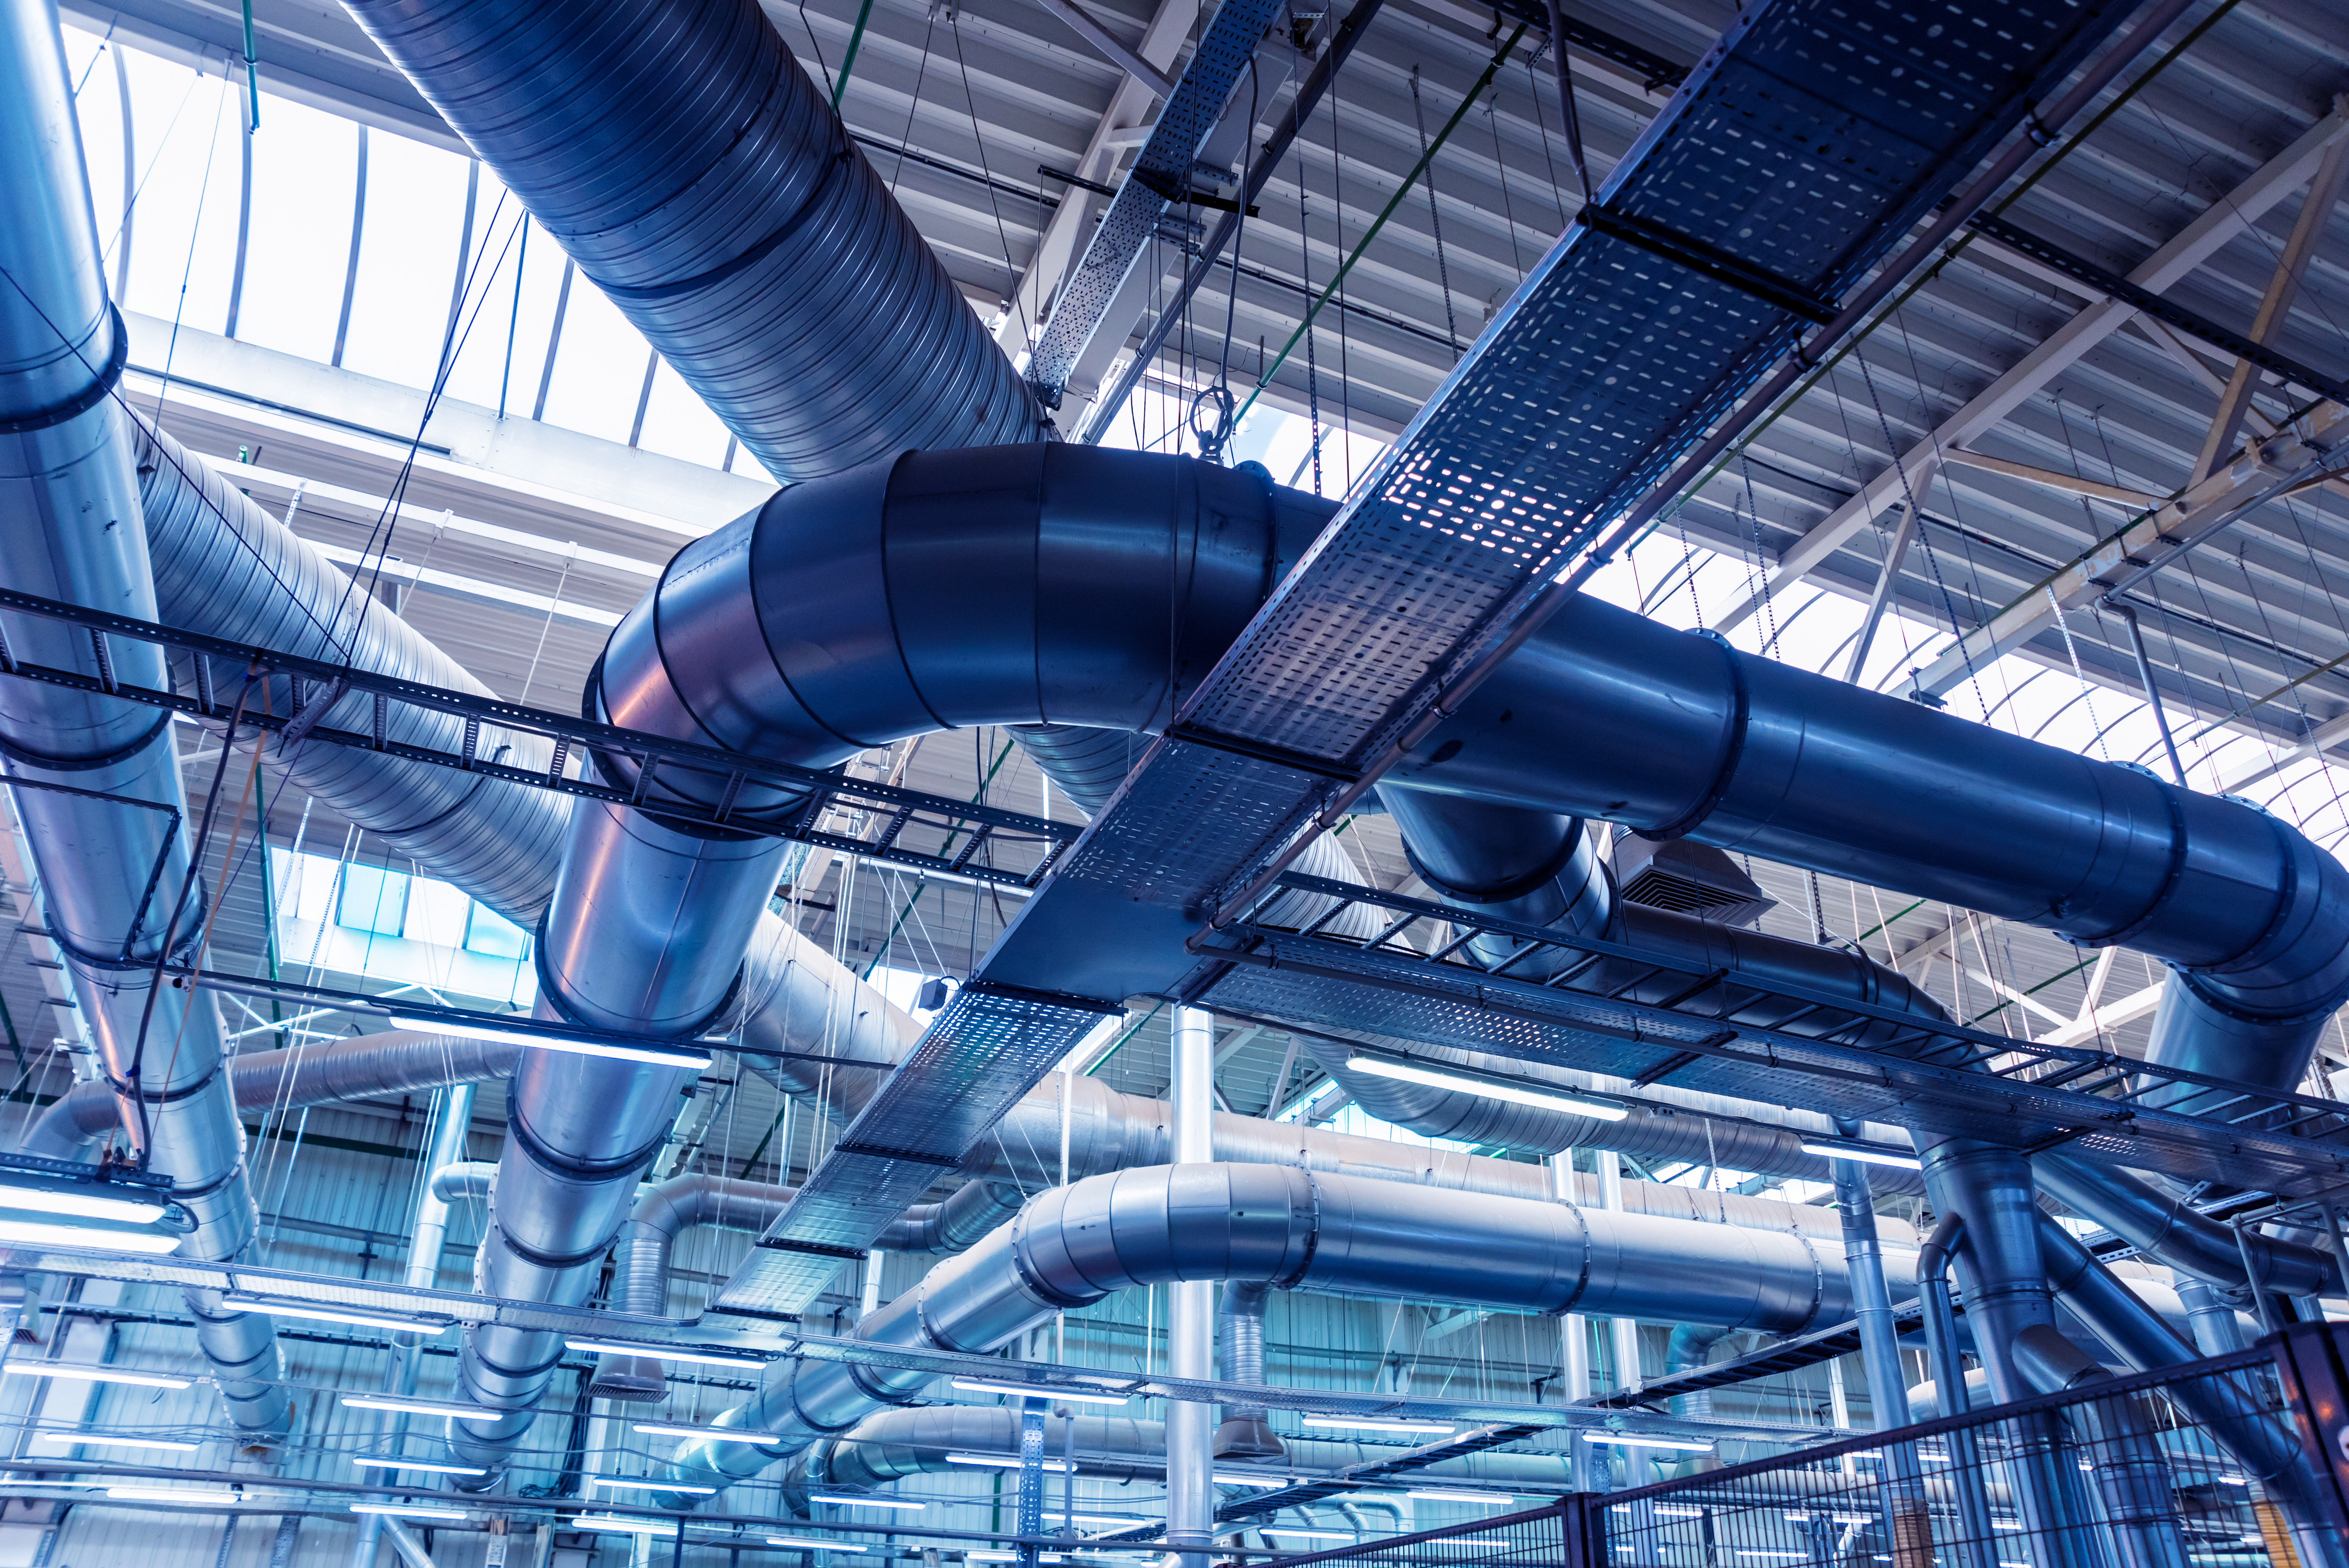 HVAC system in commercial buildings. (Image Source: AdobeStock_285910028)